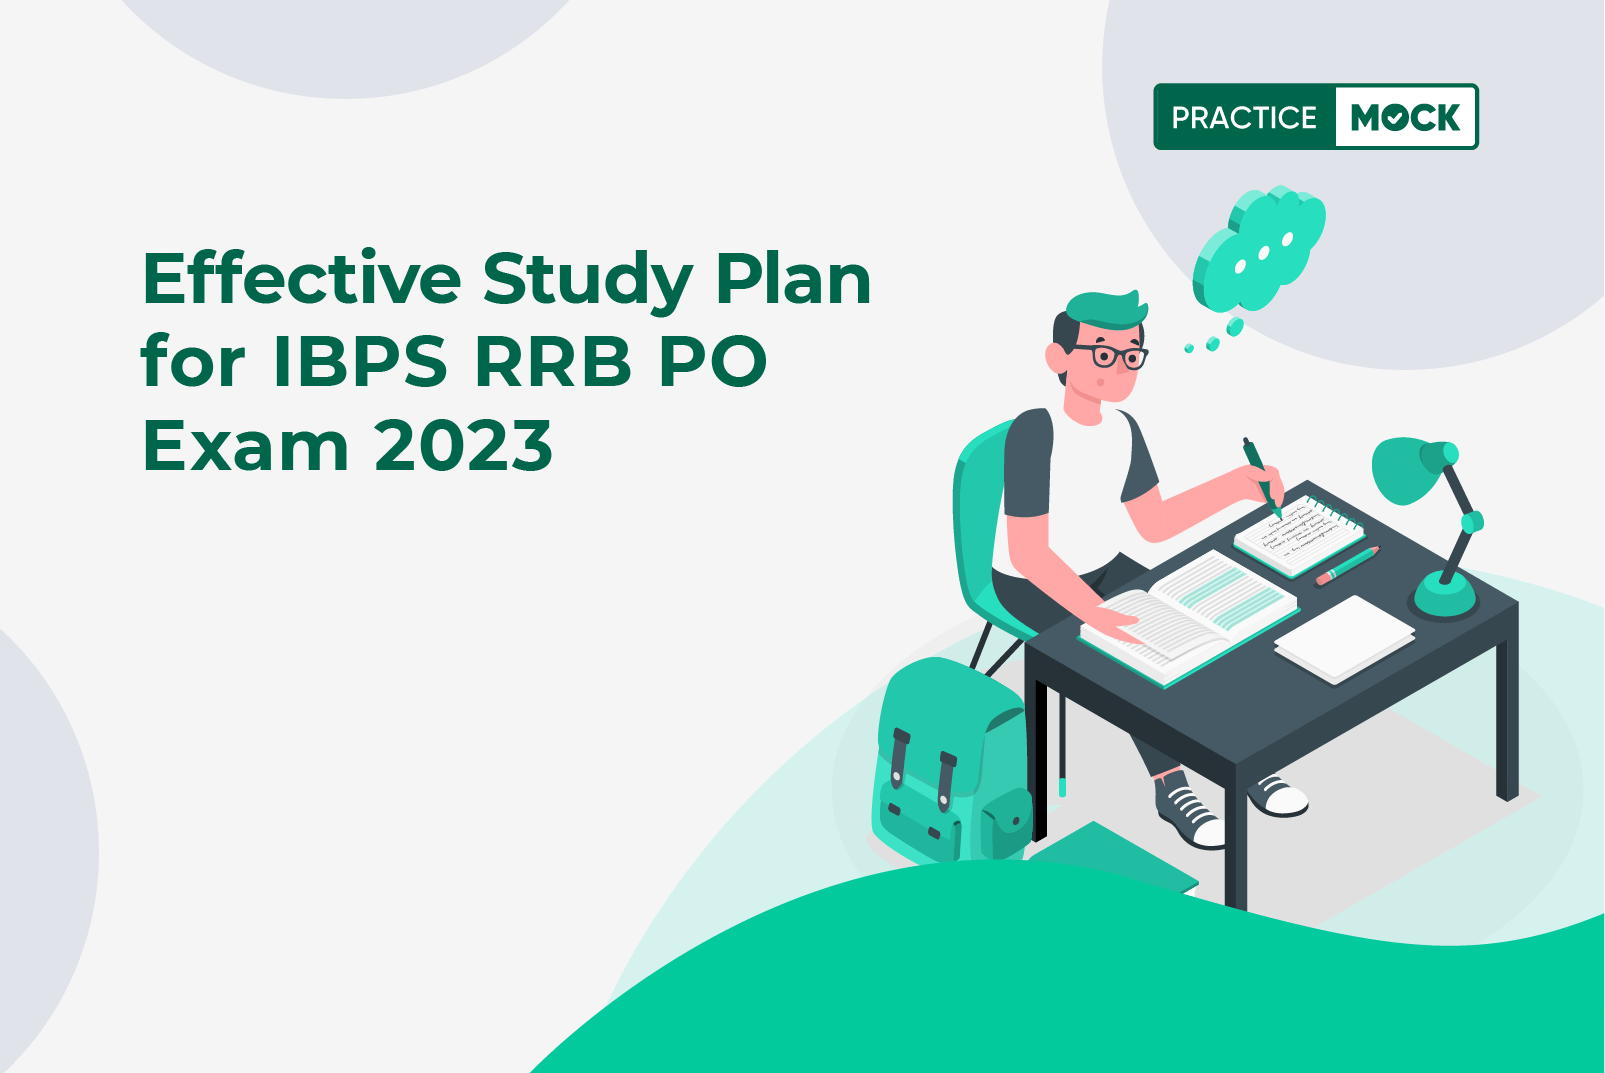 Effective Study Plan for IBPS RRB PO Exam 2023